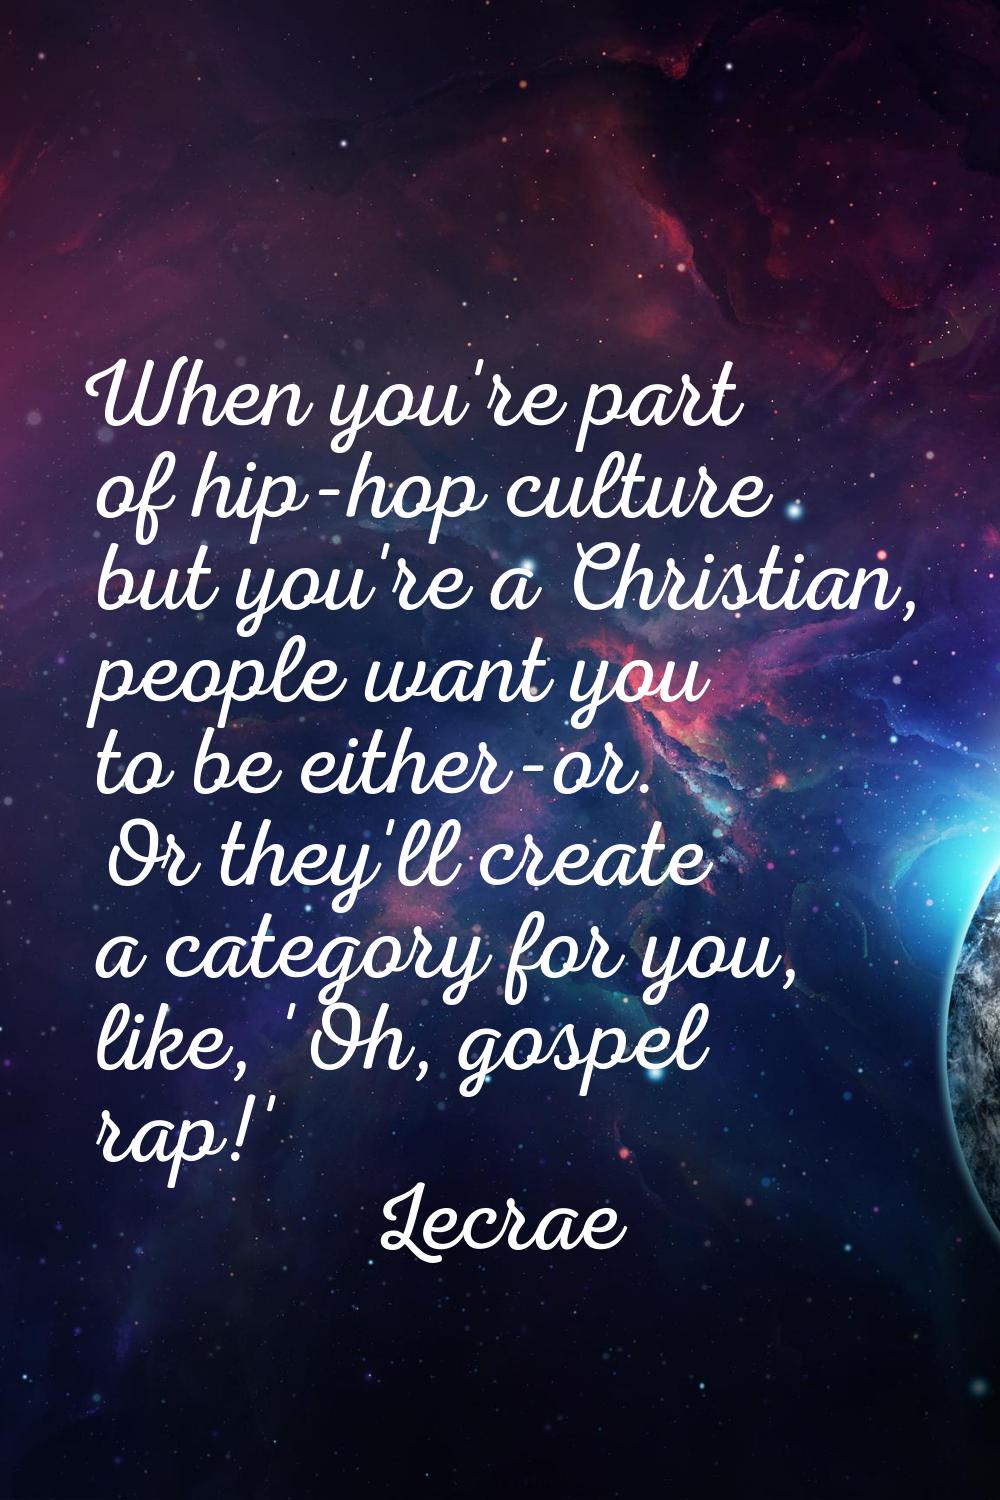 When you're part of hip-hop culture but you're a Christian, people want you to be either-or. Or the